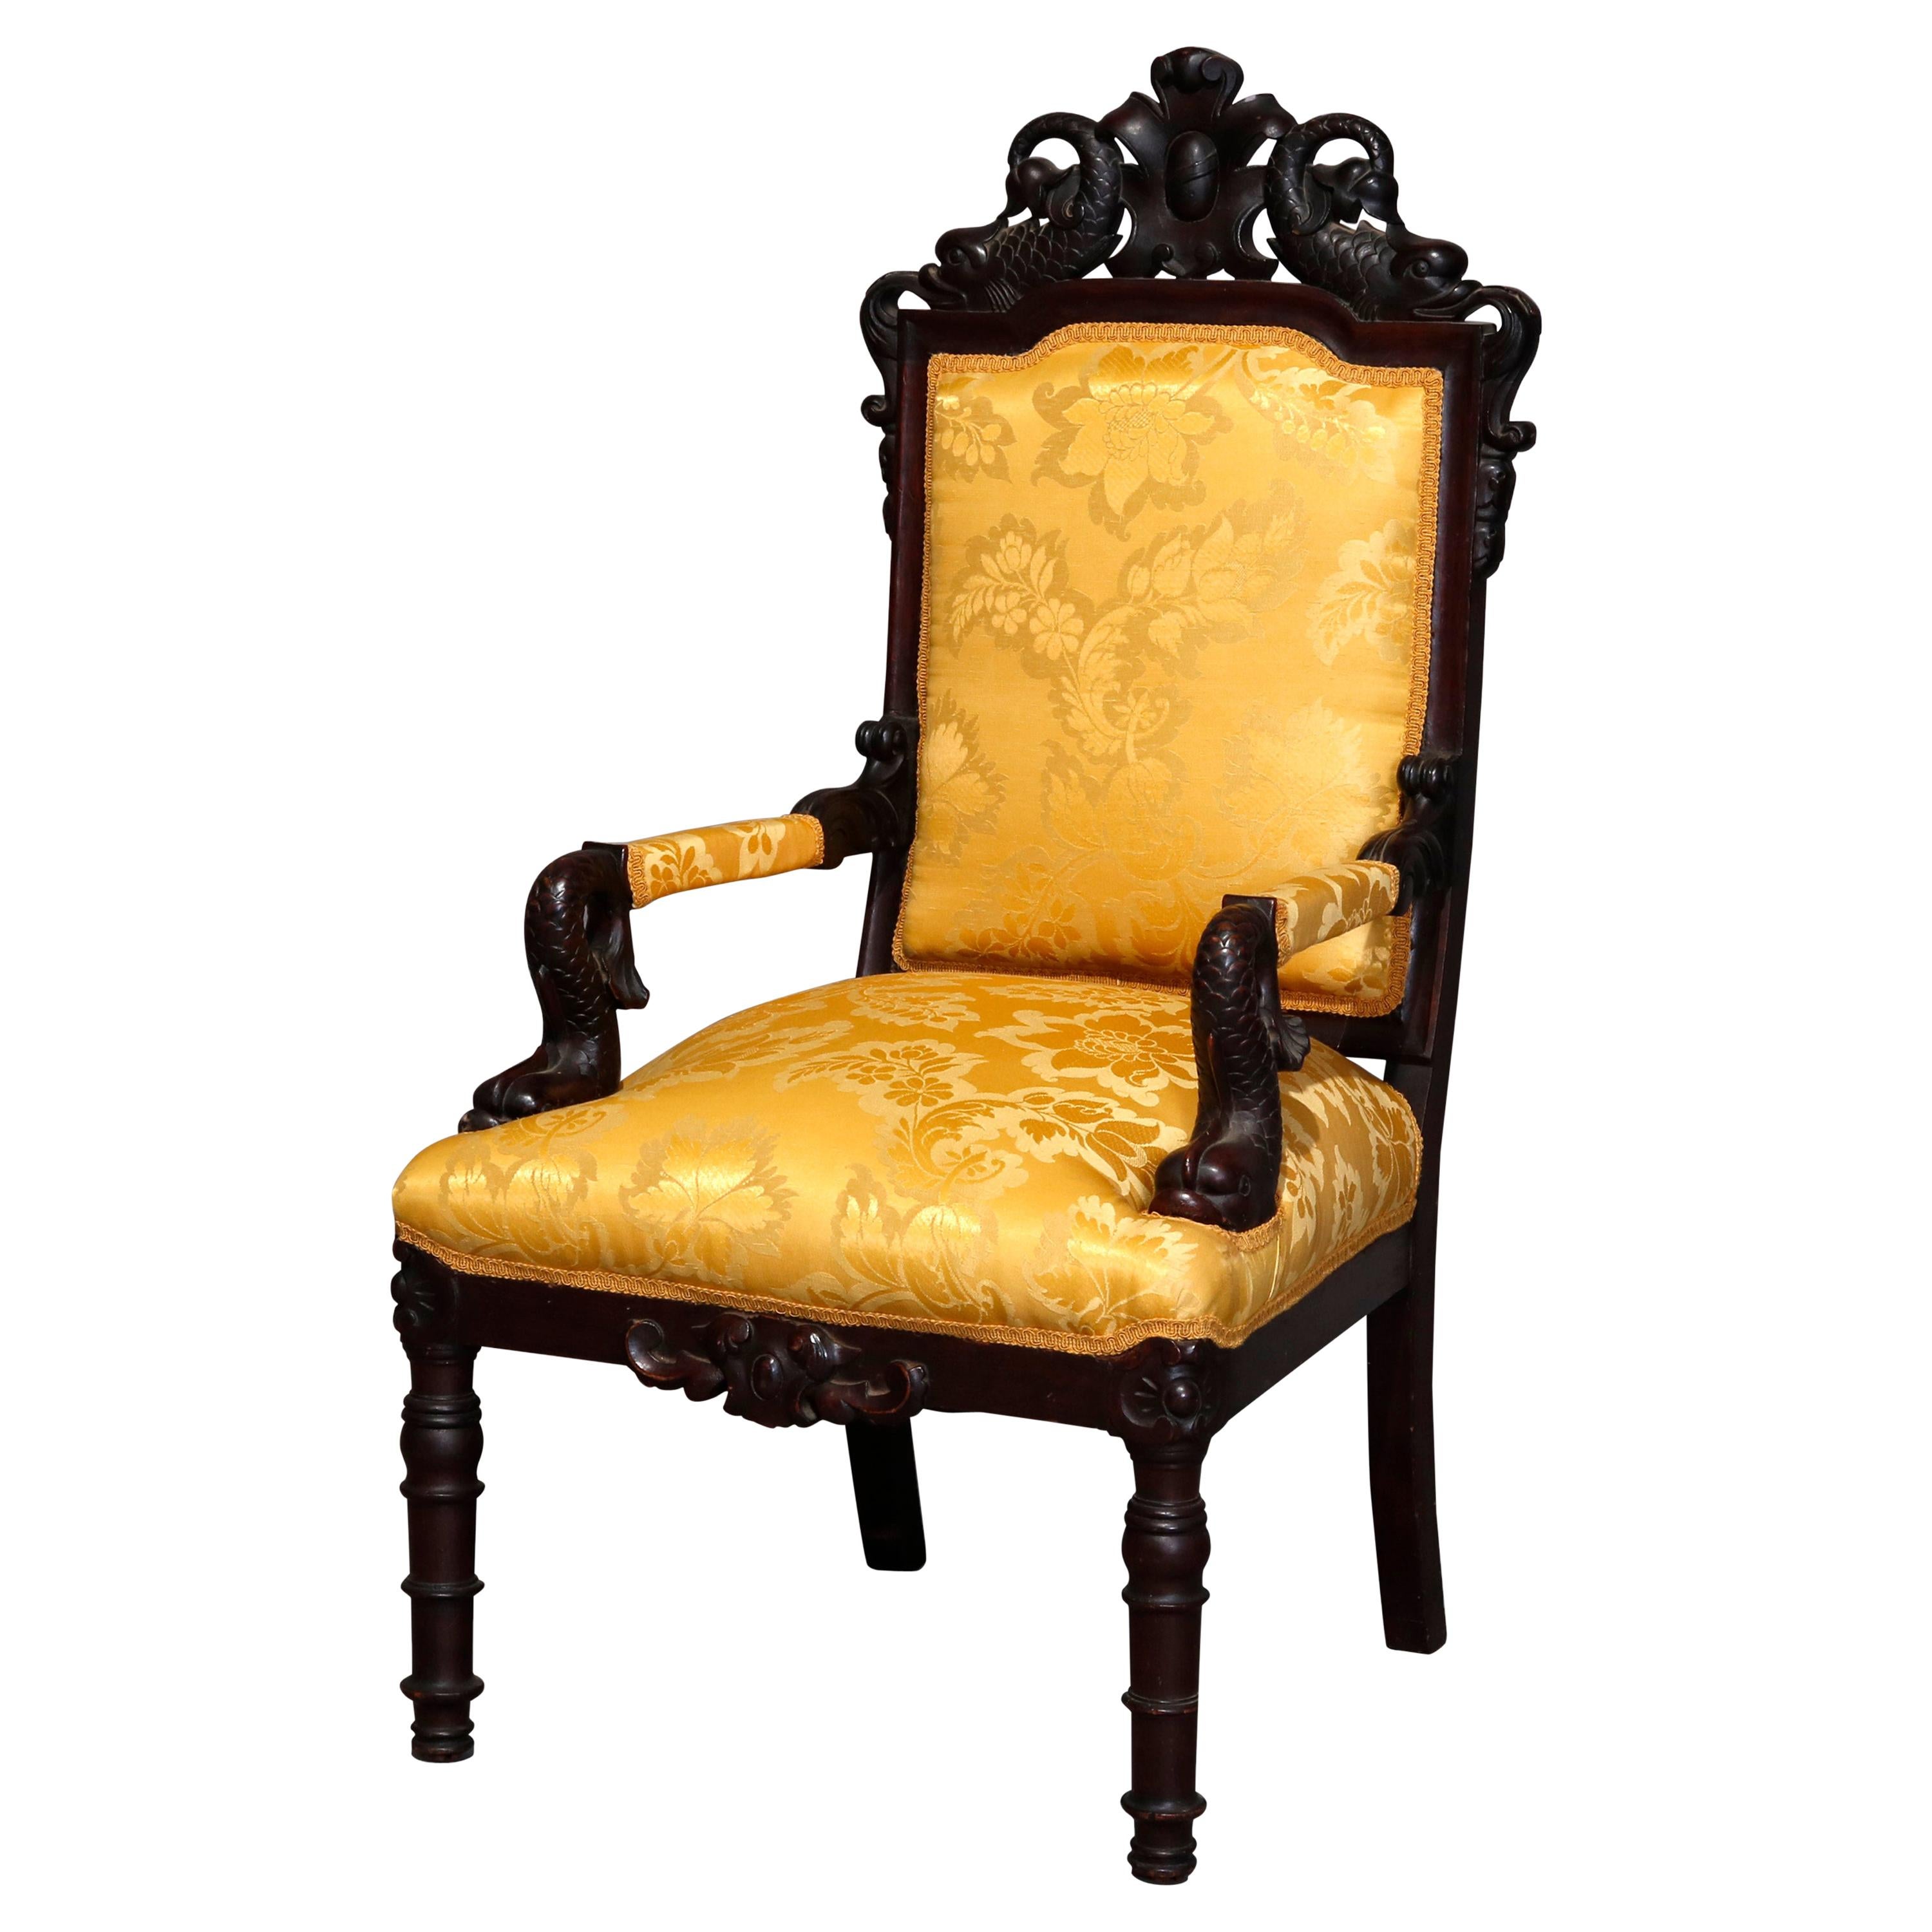 Figural Baroque Style Carved Rosewood Armchair, Fleur-de-Lis and Dolphins